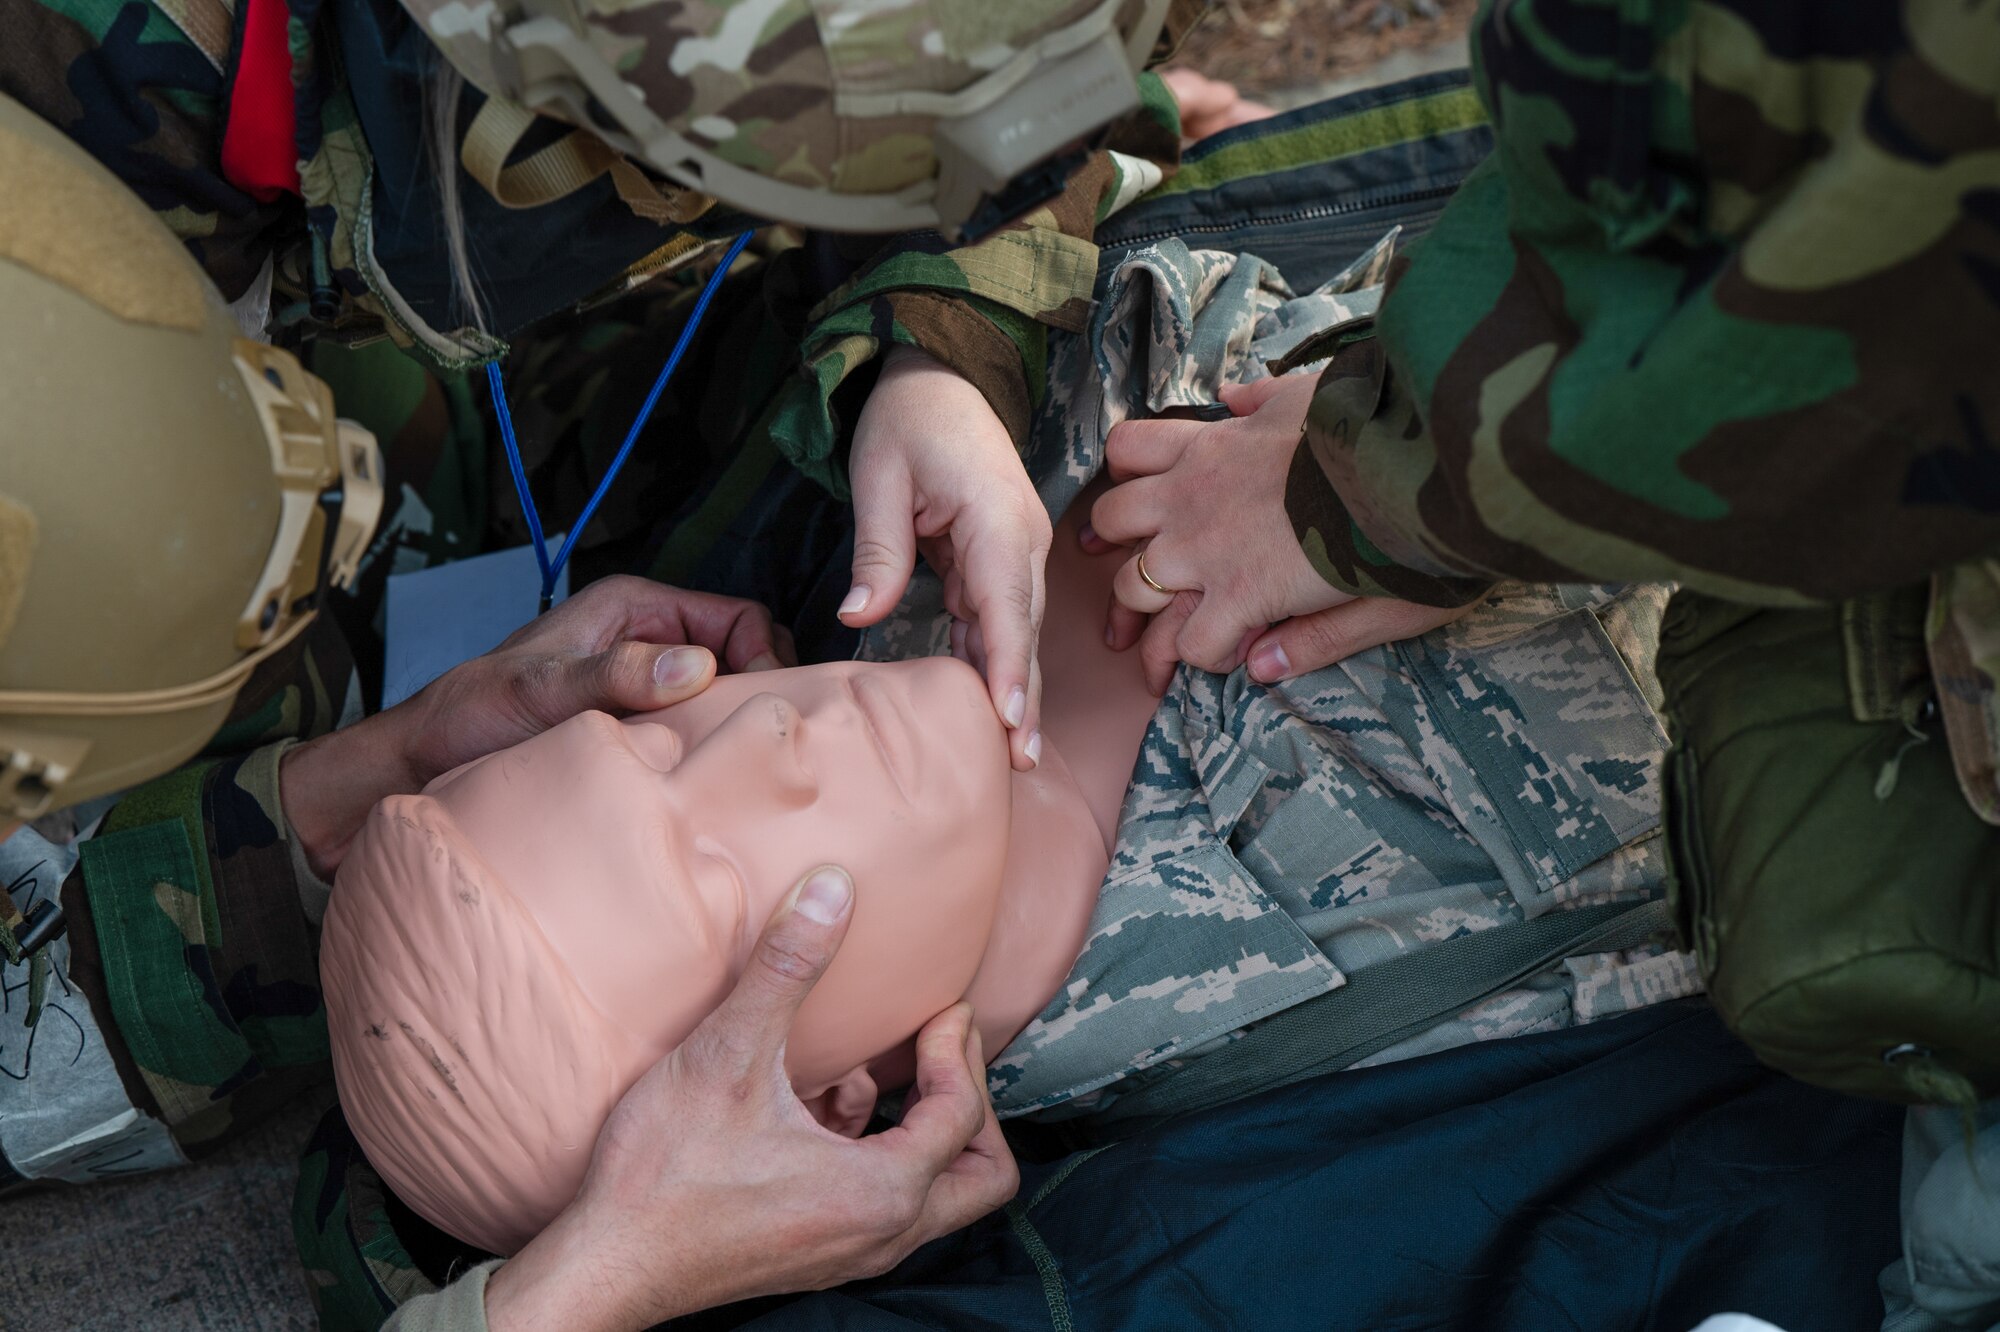 U.S. Air Force Airmen assigned to the 51st Fighter Wing simulate tactical combat casualty care on a medical training mannequin during Beverly Midnight 24-1 at Osan Air Base, Republic of Korea, Feb. 1, 2024. Airmen were tested during BM24-1 to perform basic life-saving techniques known as TCCC to stabilize trauma patients until medical personnel arrive.  BM24-1 is a routine training event that tests the military capabilities across the peninsula, allowing combined and joint training at both the operational and tactical levels. (U.S. Air Force photo by Senior Airman Brittany Russell)